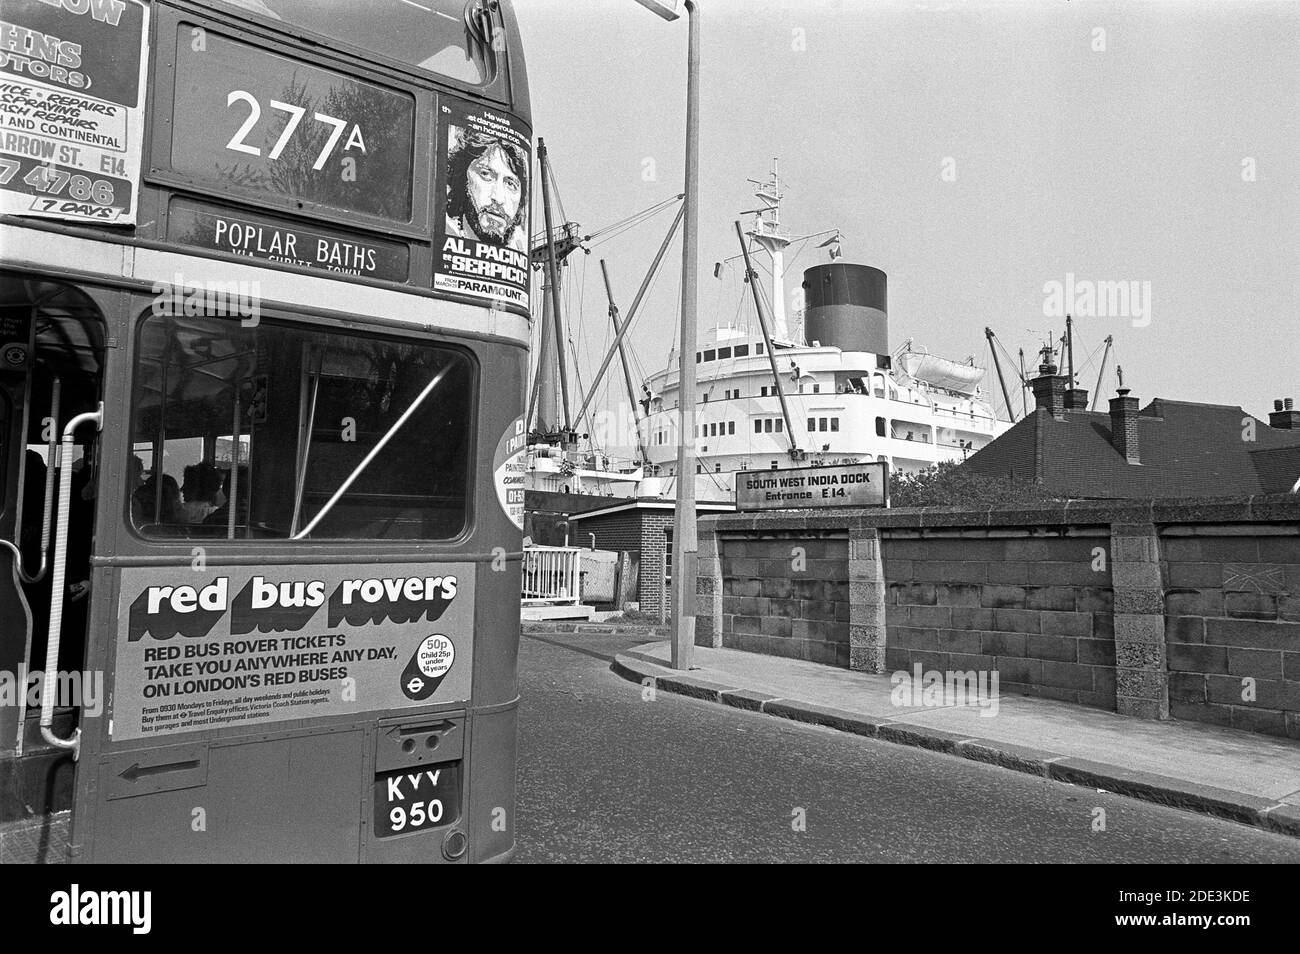 UK, London, Docklands, Isle of Dogs. West India south dock entrance, Preston's Rd / Manchester Road E14. London double-decker red bus (type RT) stopped at the raised Blue Bridge, heading north, as a ship passes through the channel that runs between the River Thames & the West India south dock. Al Pacino 'Serpico' film poster and advertising for local garage Barlow & John's Motors of Narrow Street E14. Factory employee housing over the wall to right. Stock Photo